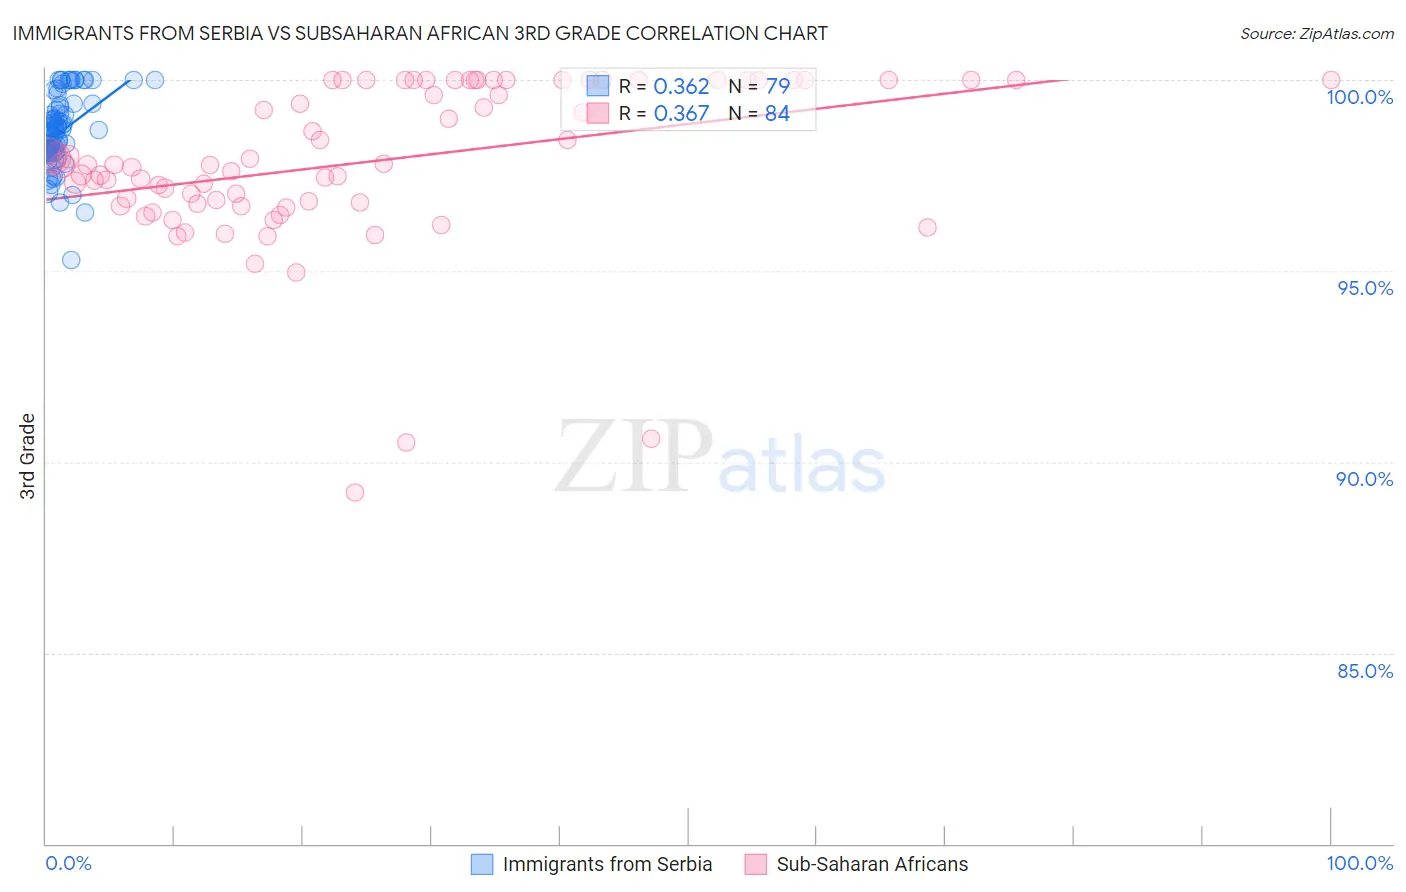 Immigrants from Serbia vs Subsaharan African 3rd Grade